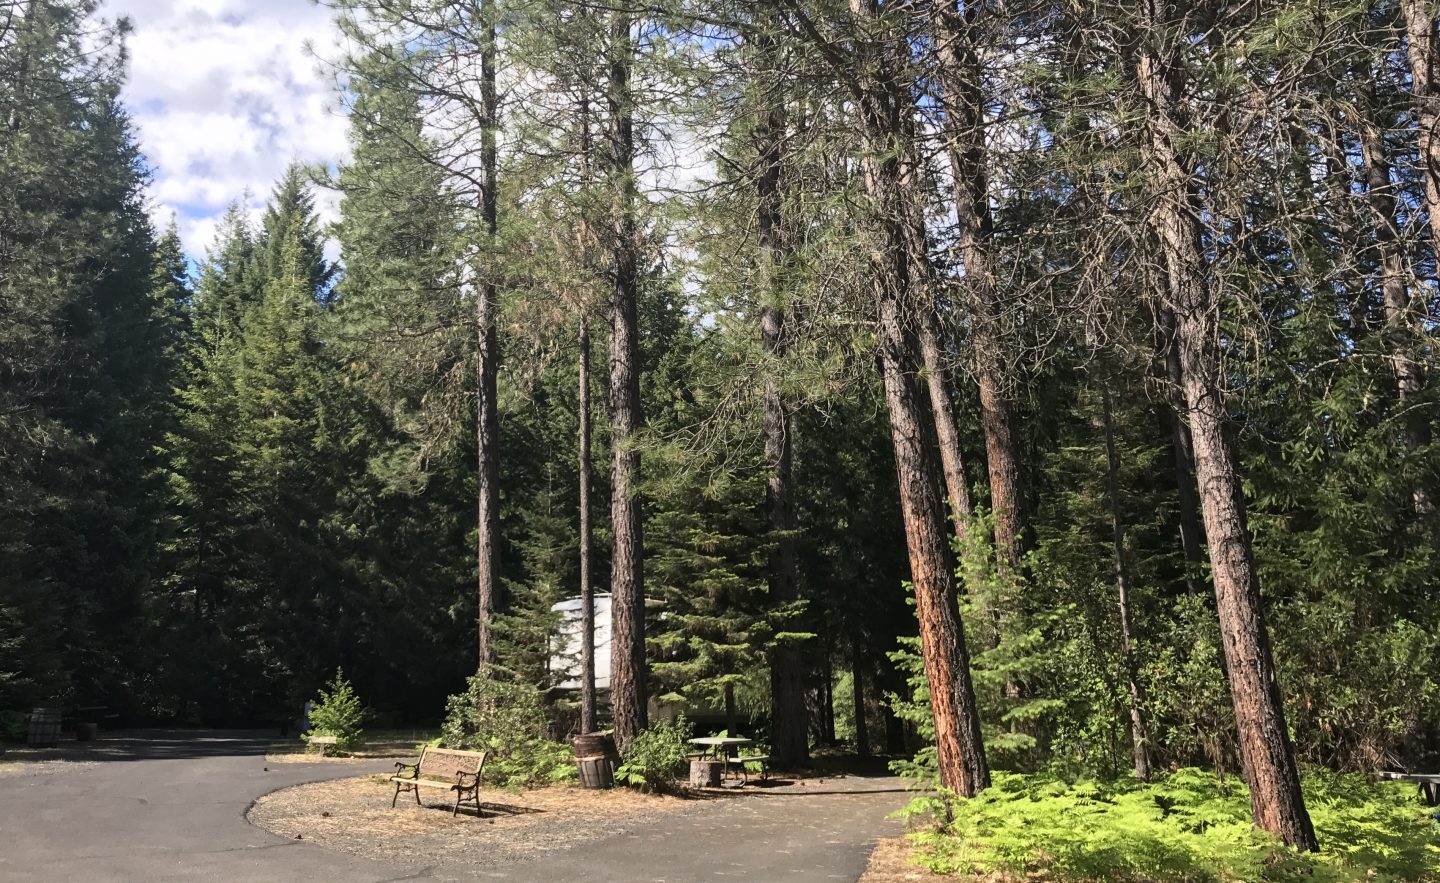 Sites at Crater Lake RV Park have enough trees between them to offer privacy with natural views, and most back up to forested areas.